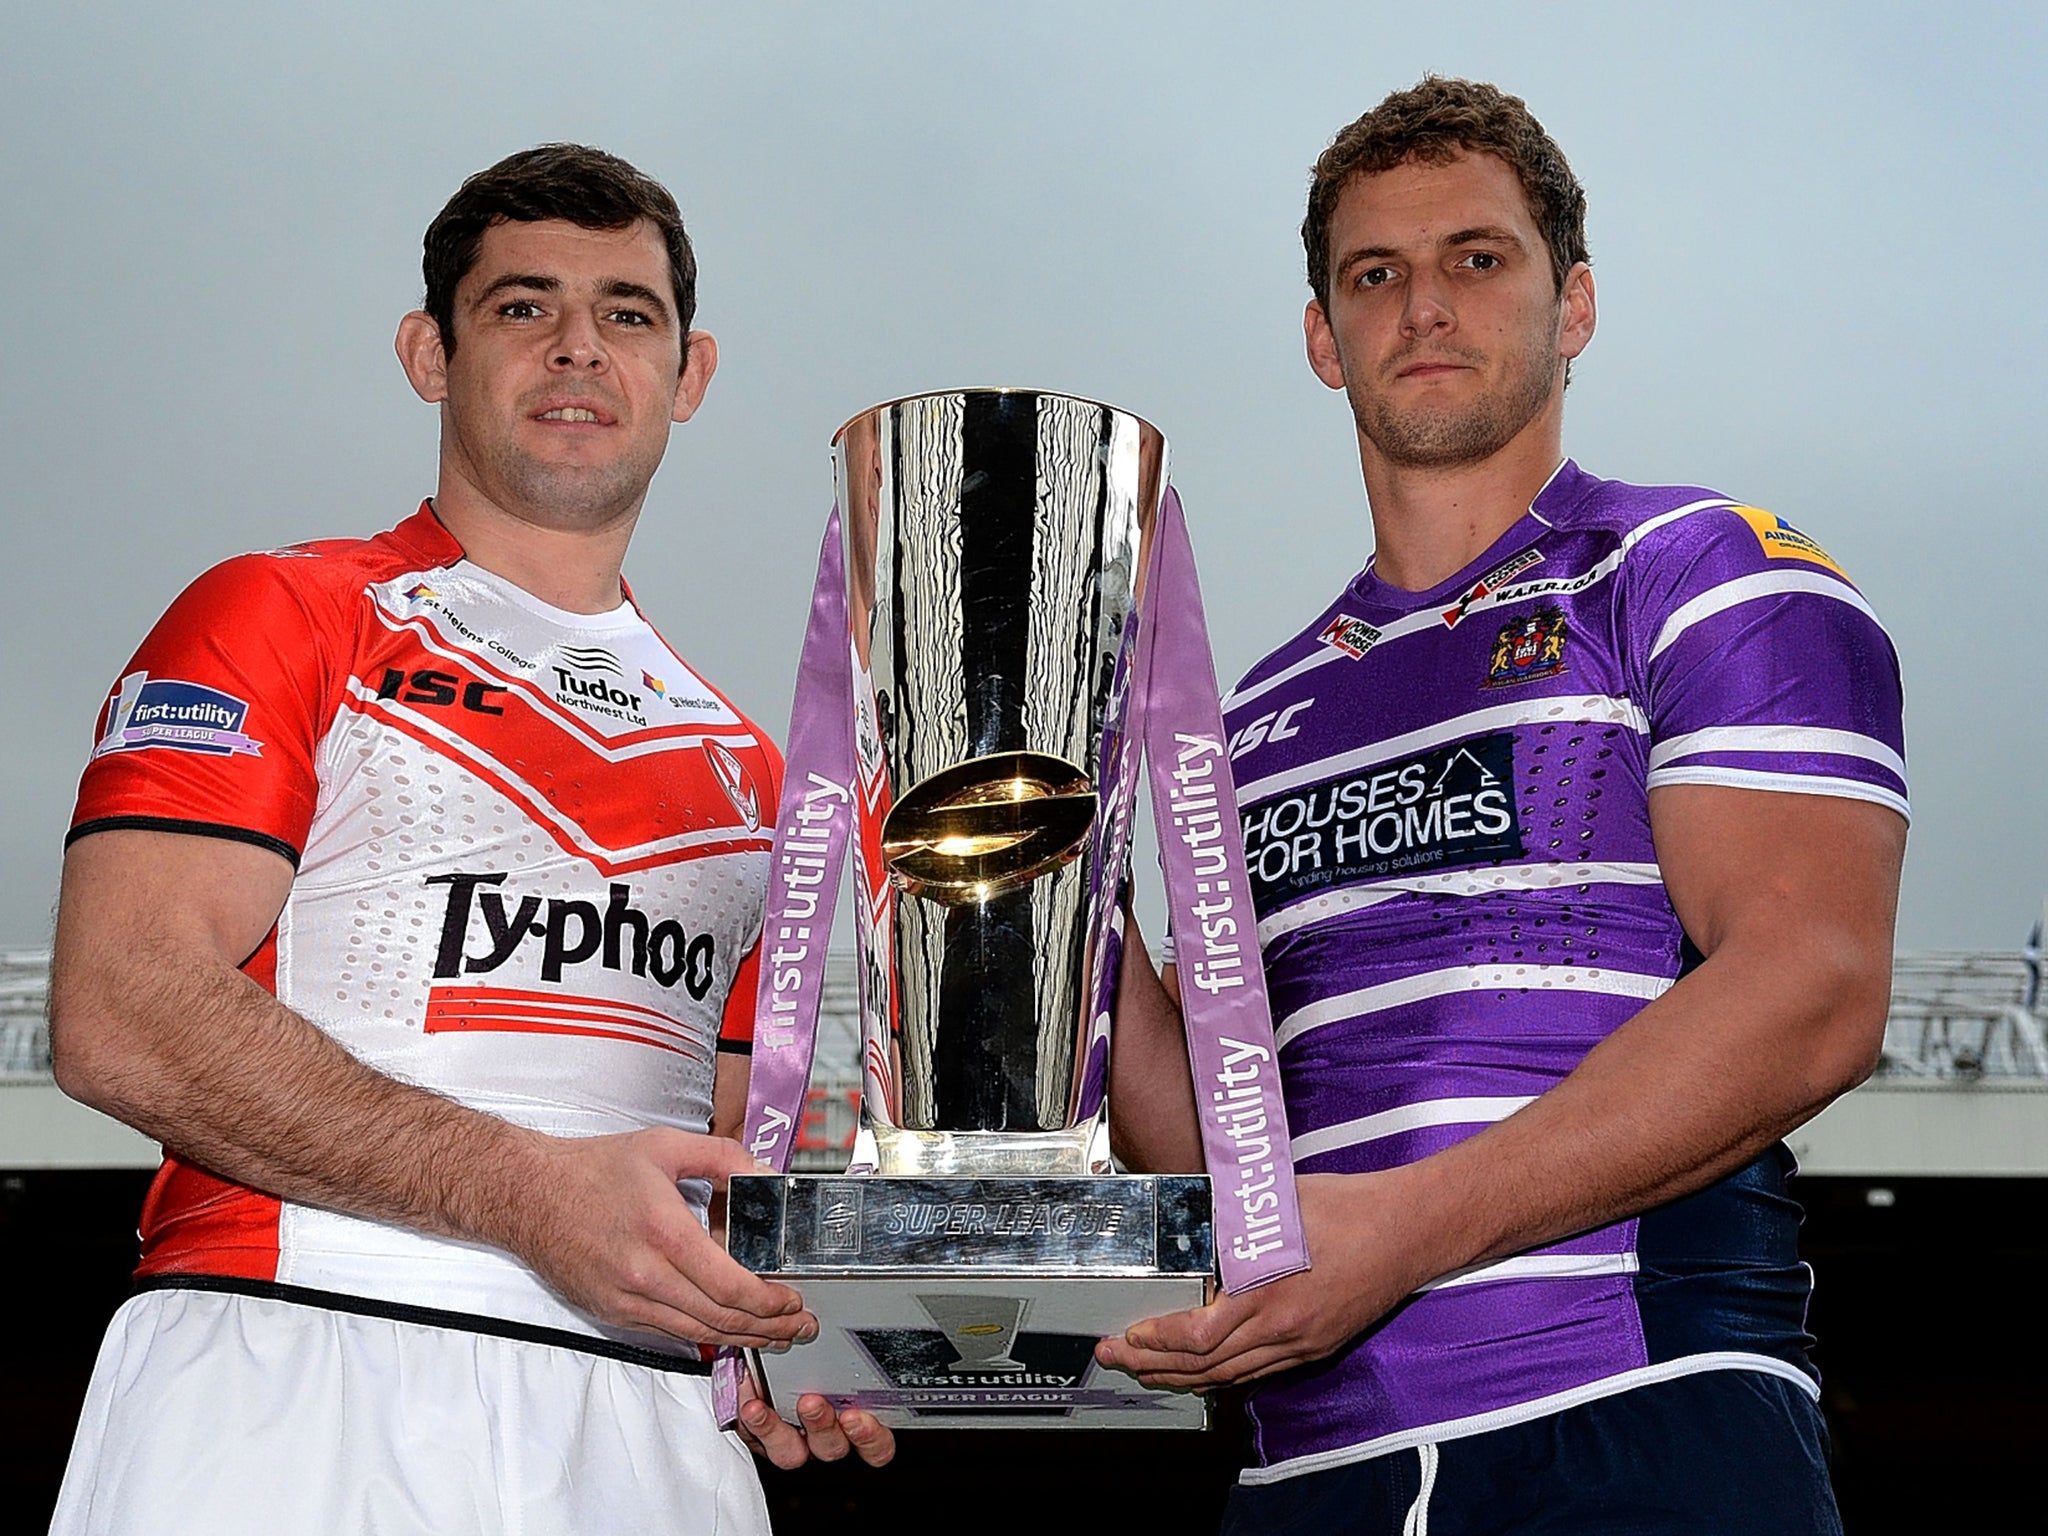 St Helens captain Paul Wellens (left) with Wigan counterpart Sean O'Loughlin